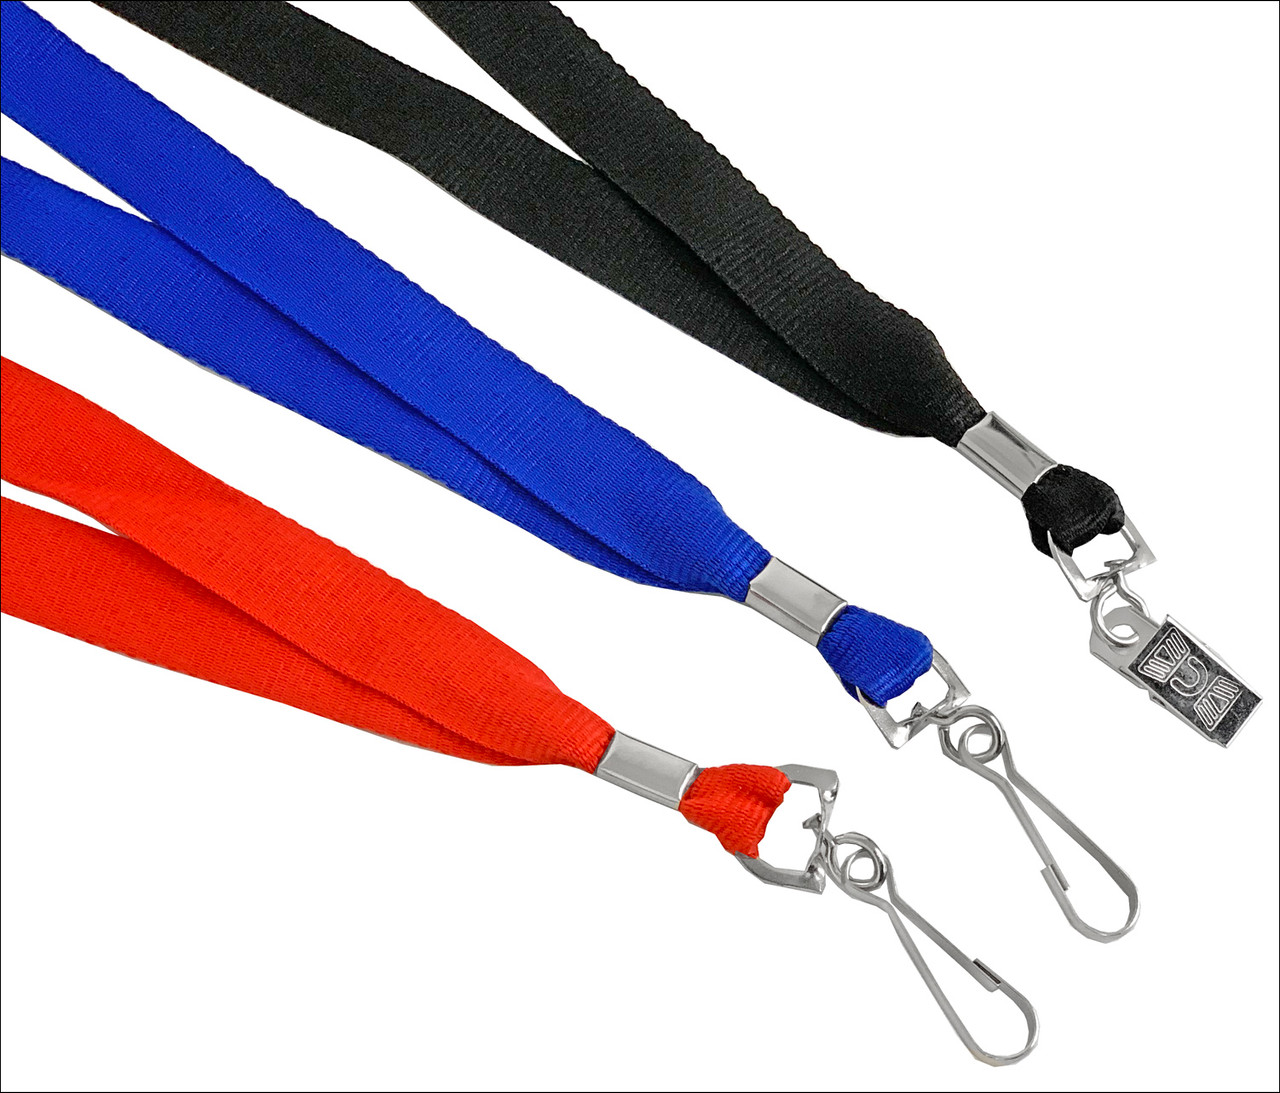 3/4 Wide Lanyard with Hook or Clip